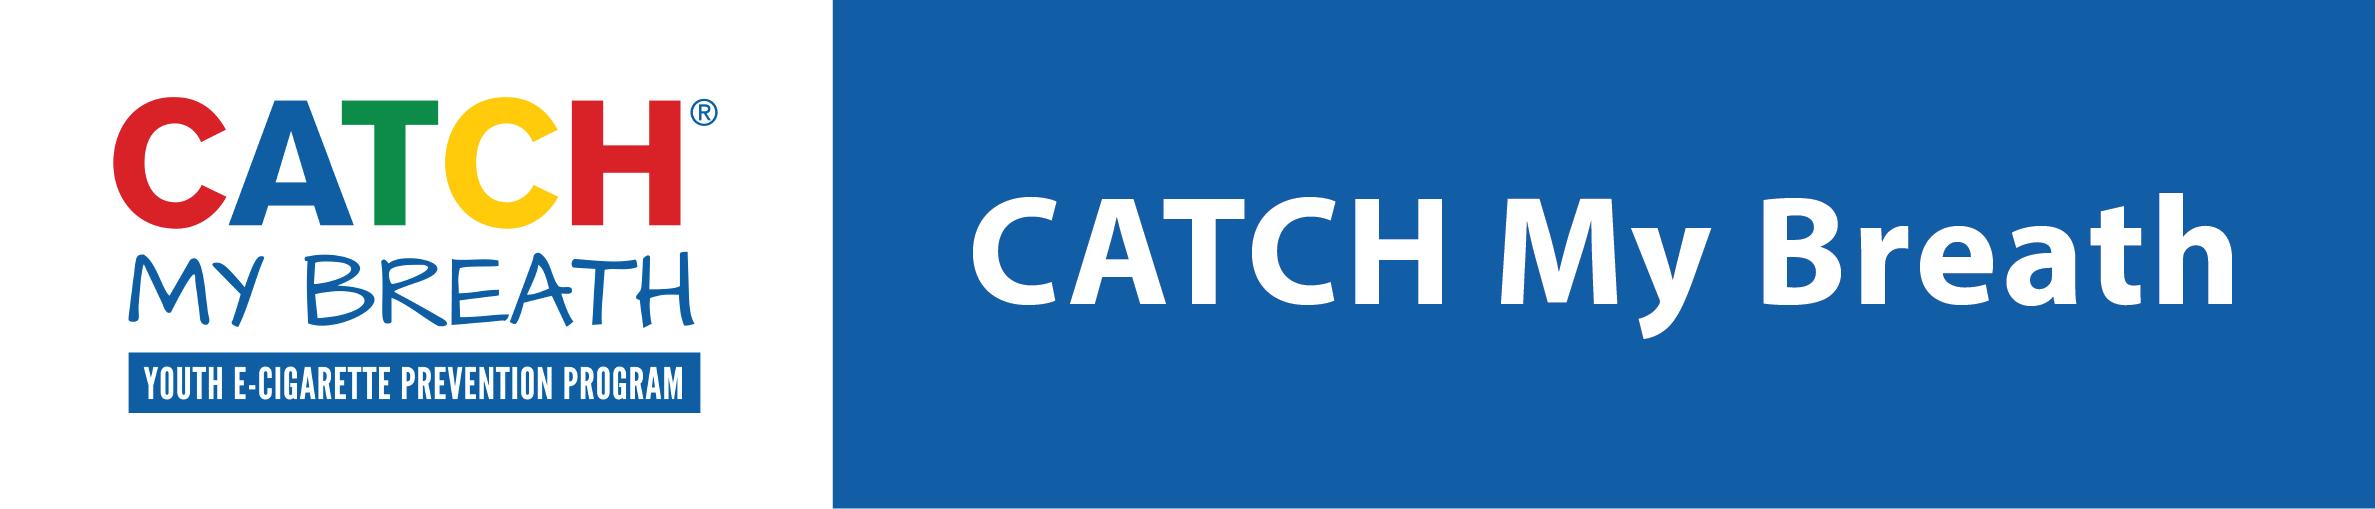 Banner image for CATCH My Breath